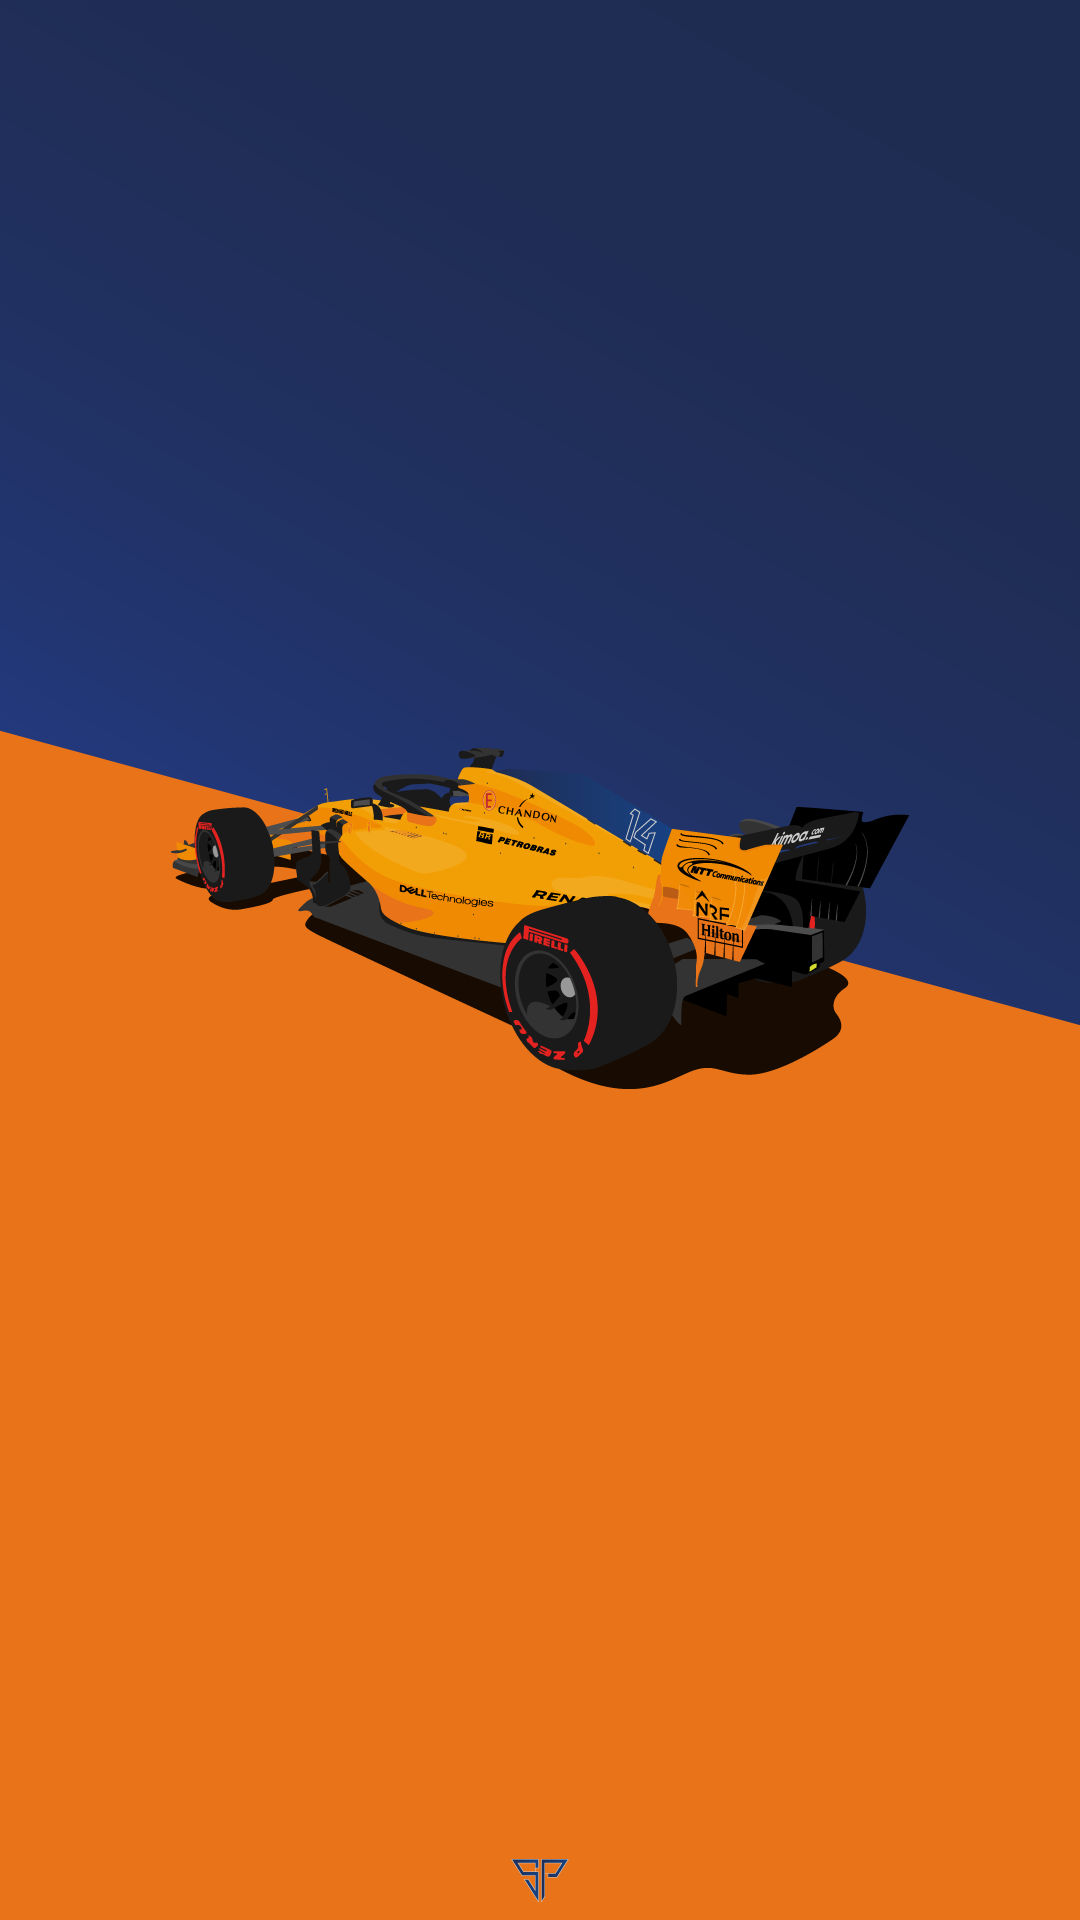 MCL33 Phone Wallpaper I made